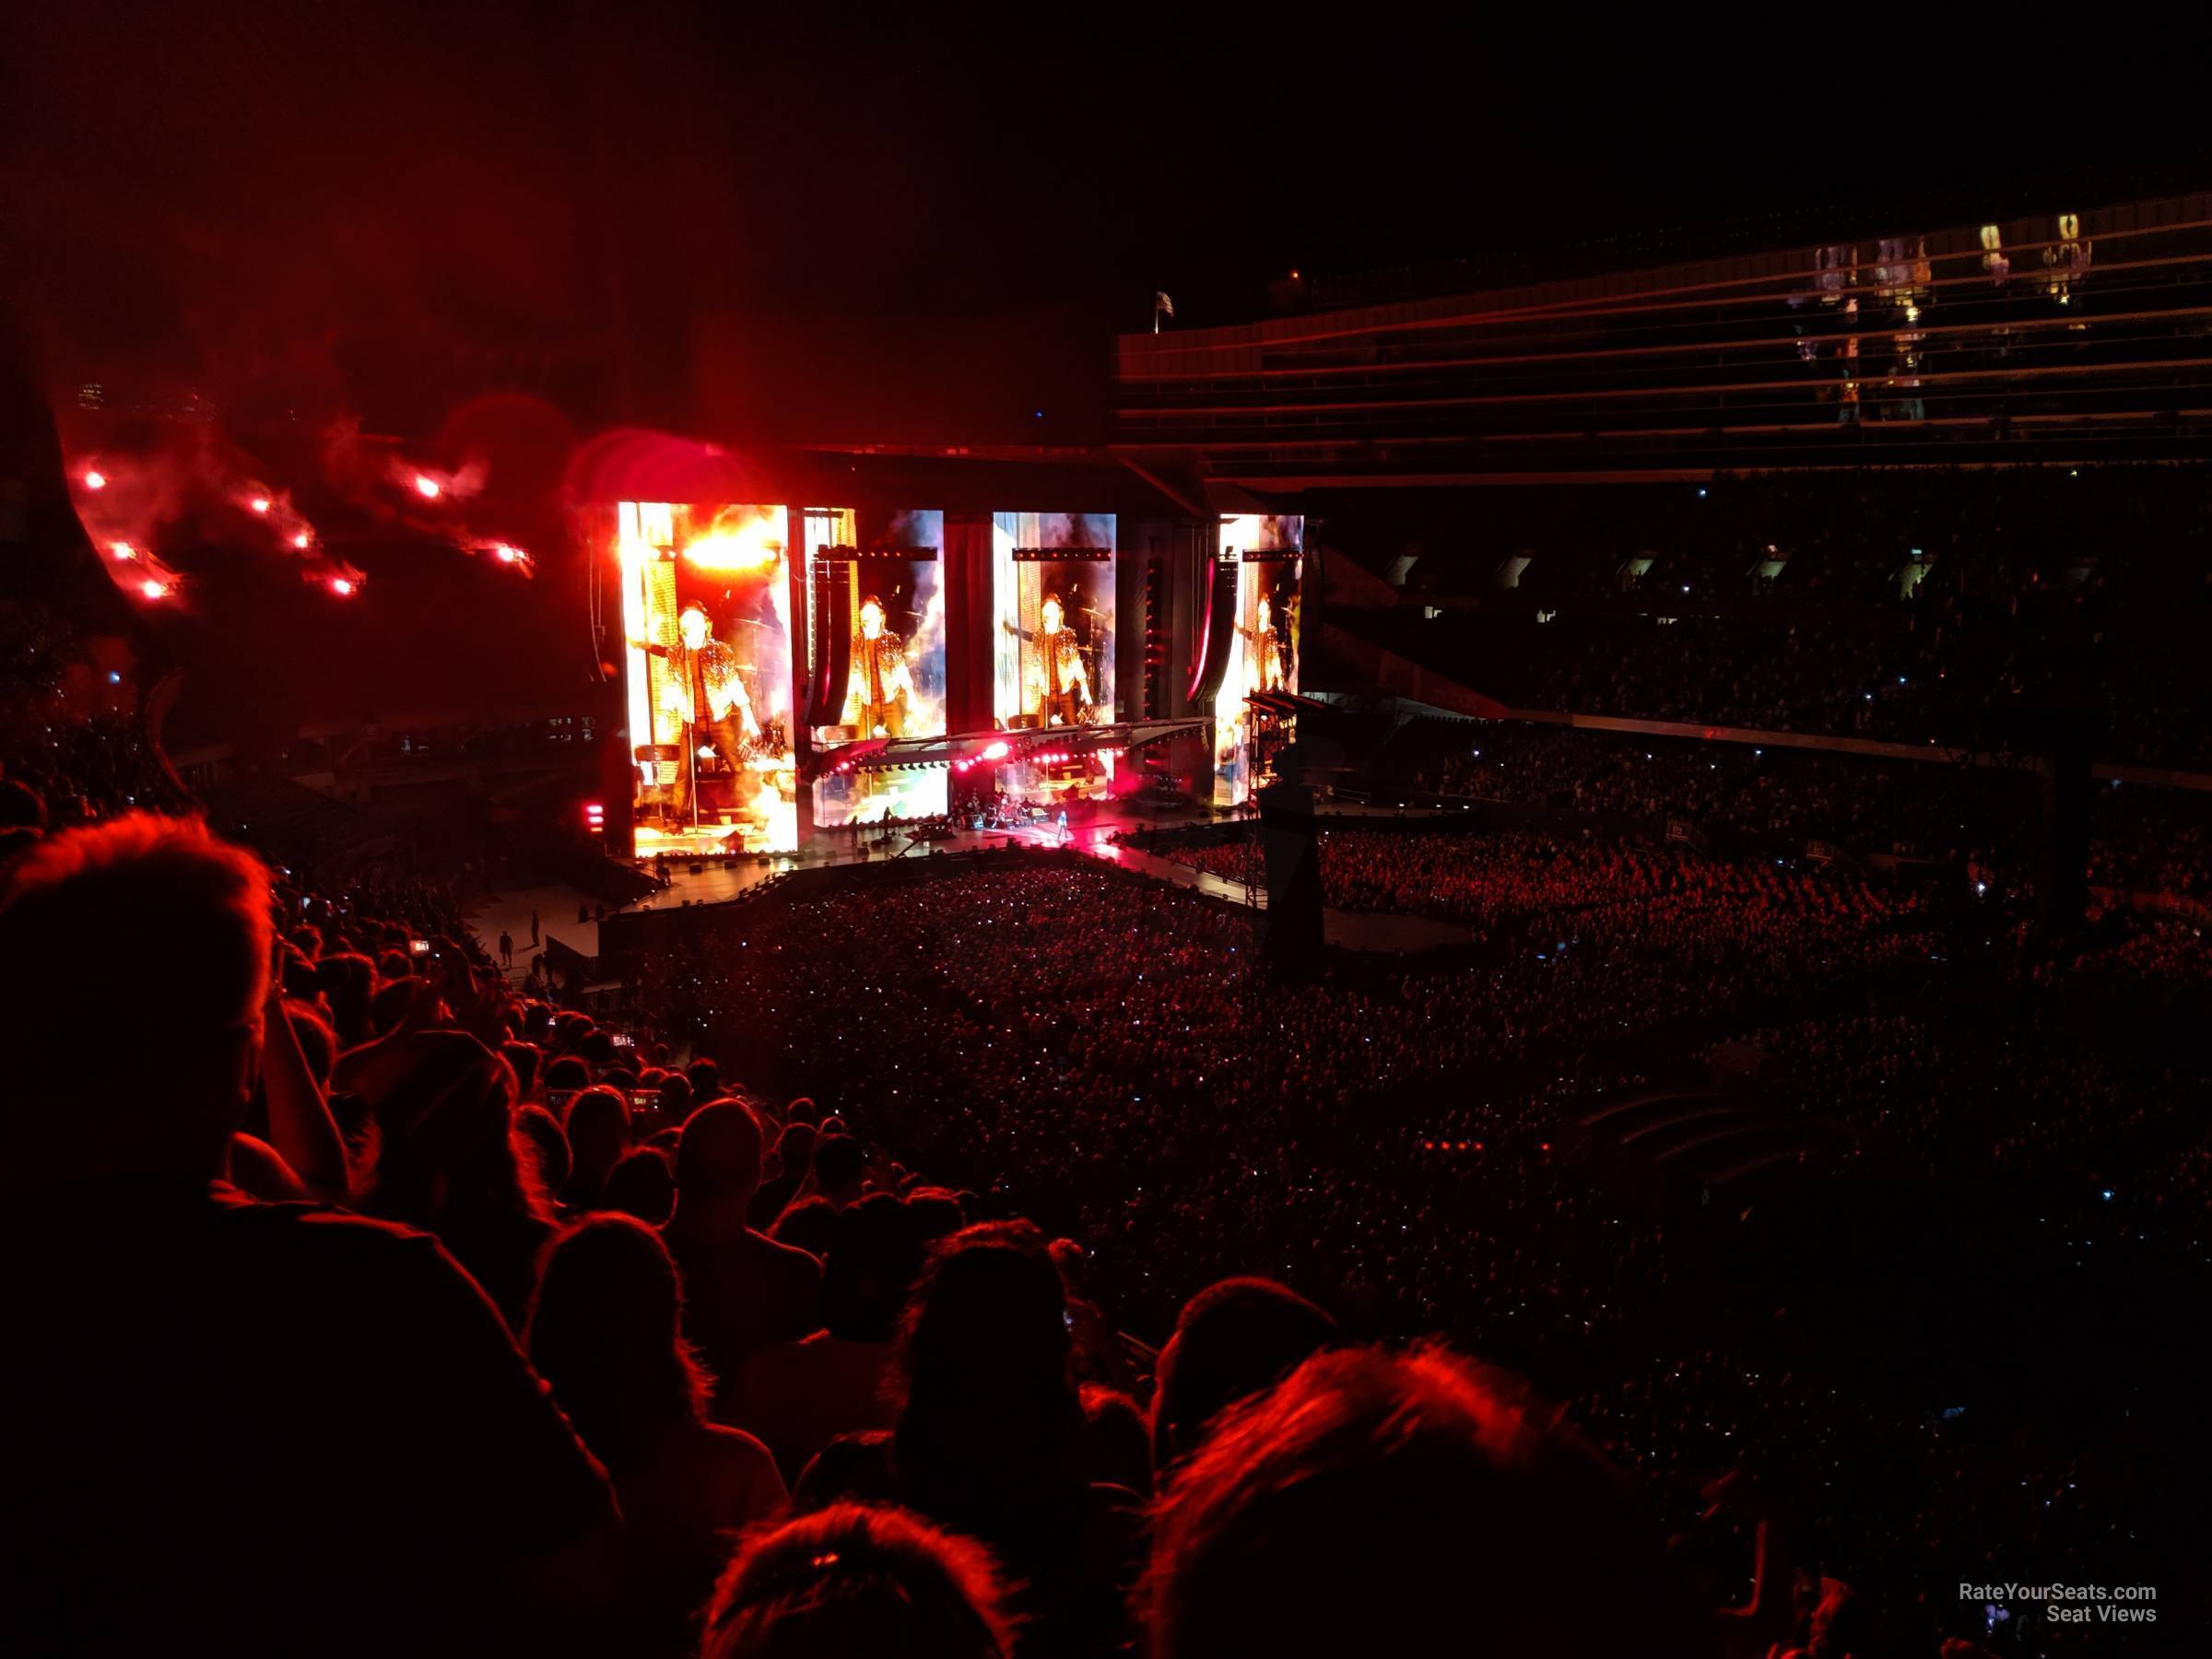 section 333, row 15 seat view  for concert - soldier field